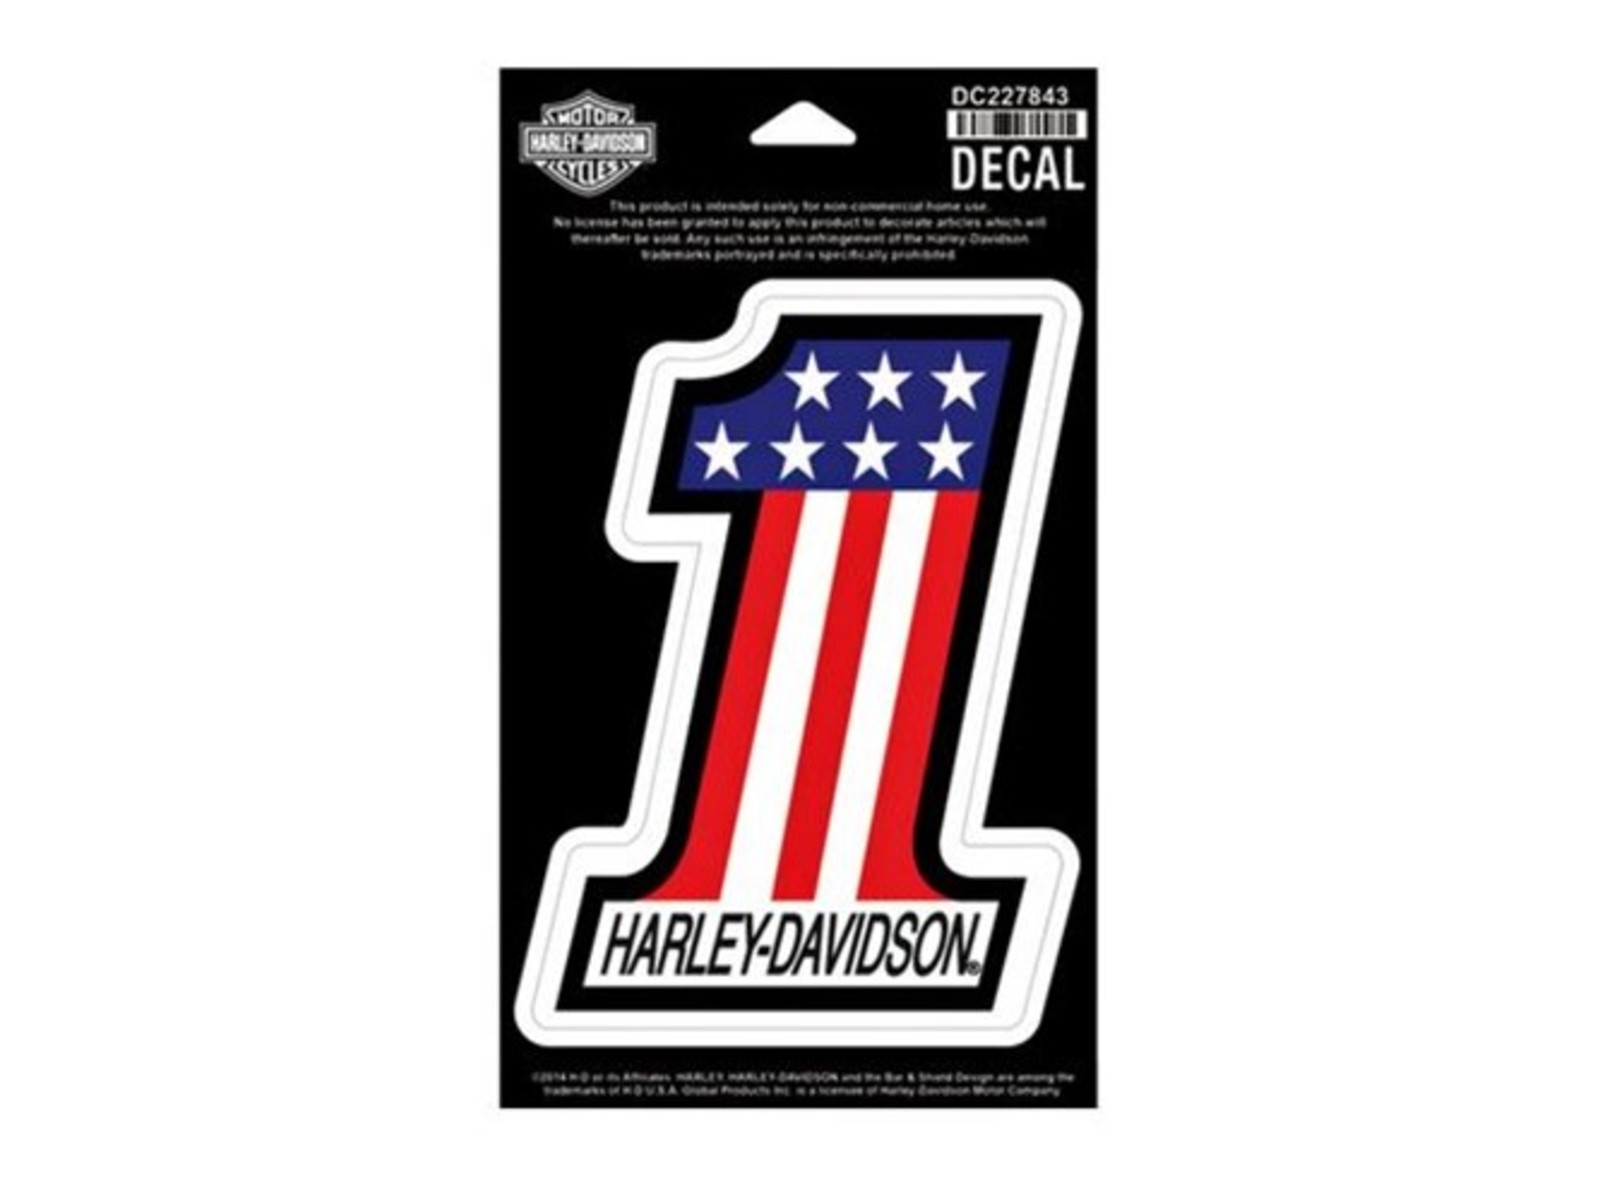 Harley Davidson Decal Sticker 1 Red White Blue Dc227843 Small